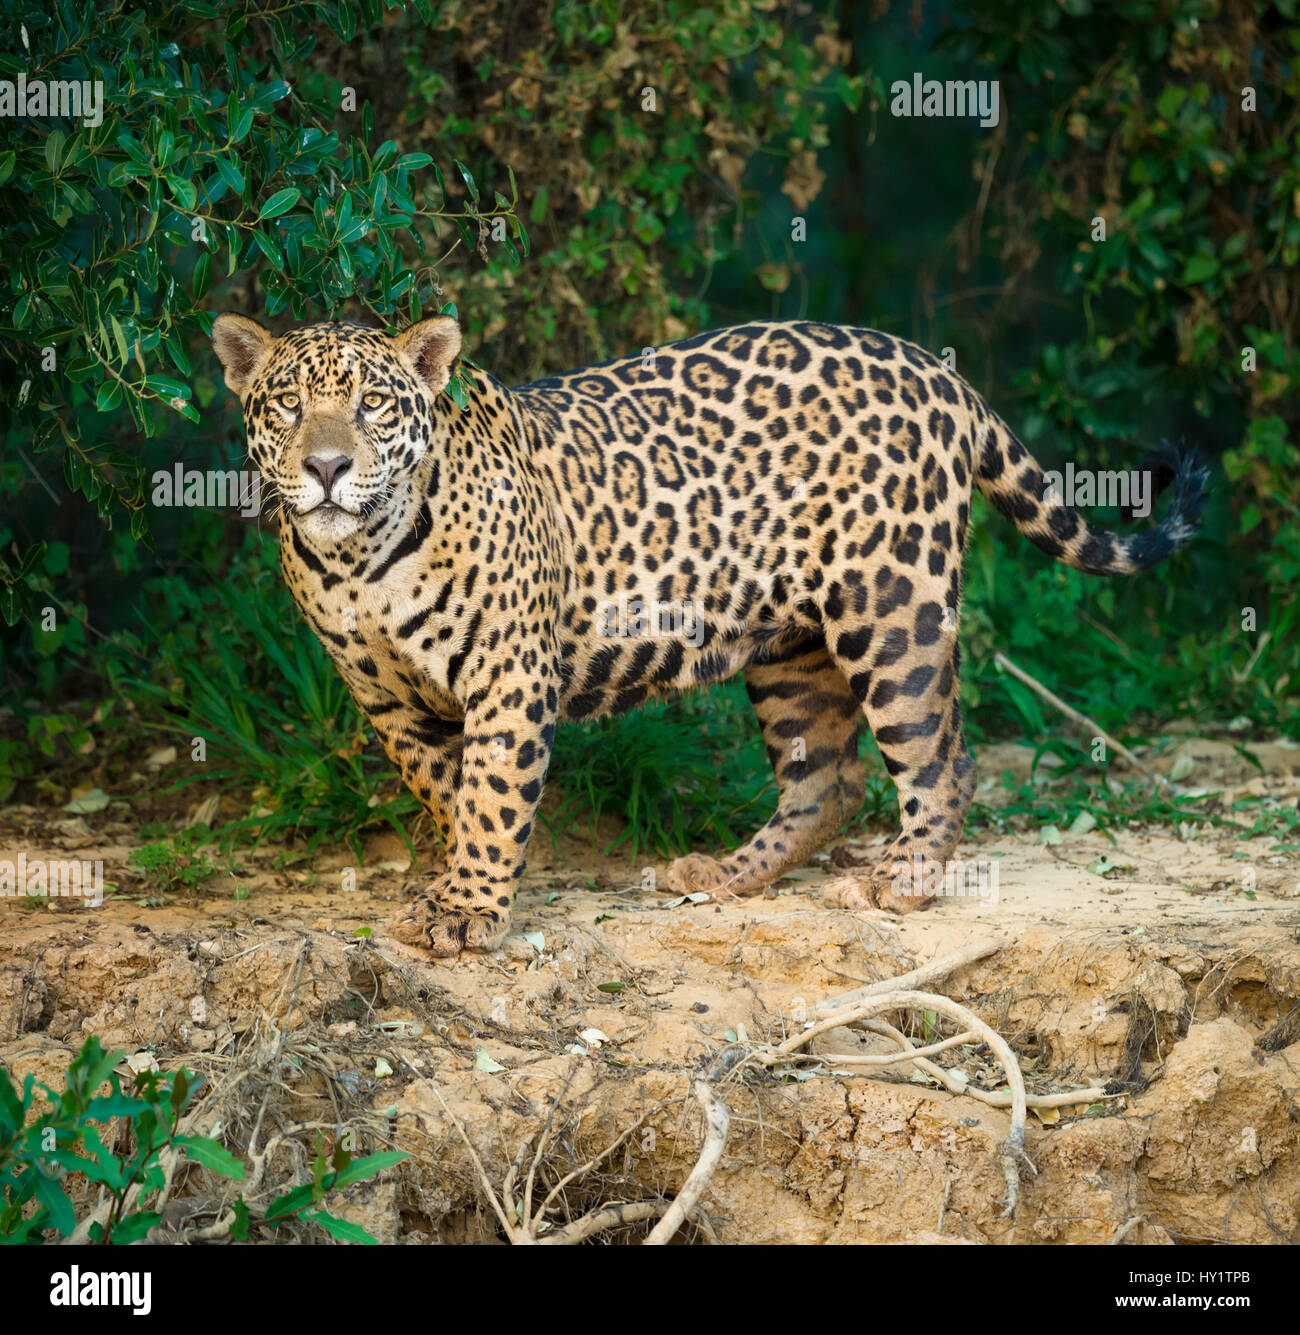 Wild male Jaguar (Panthera onca palustris) along the bank of the Cuiaba River in late afternoon sun light. Northern Pantanal, Brazil. Stock Photo